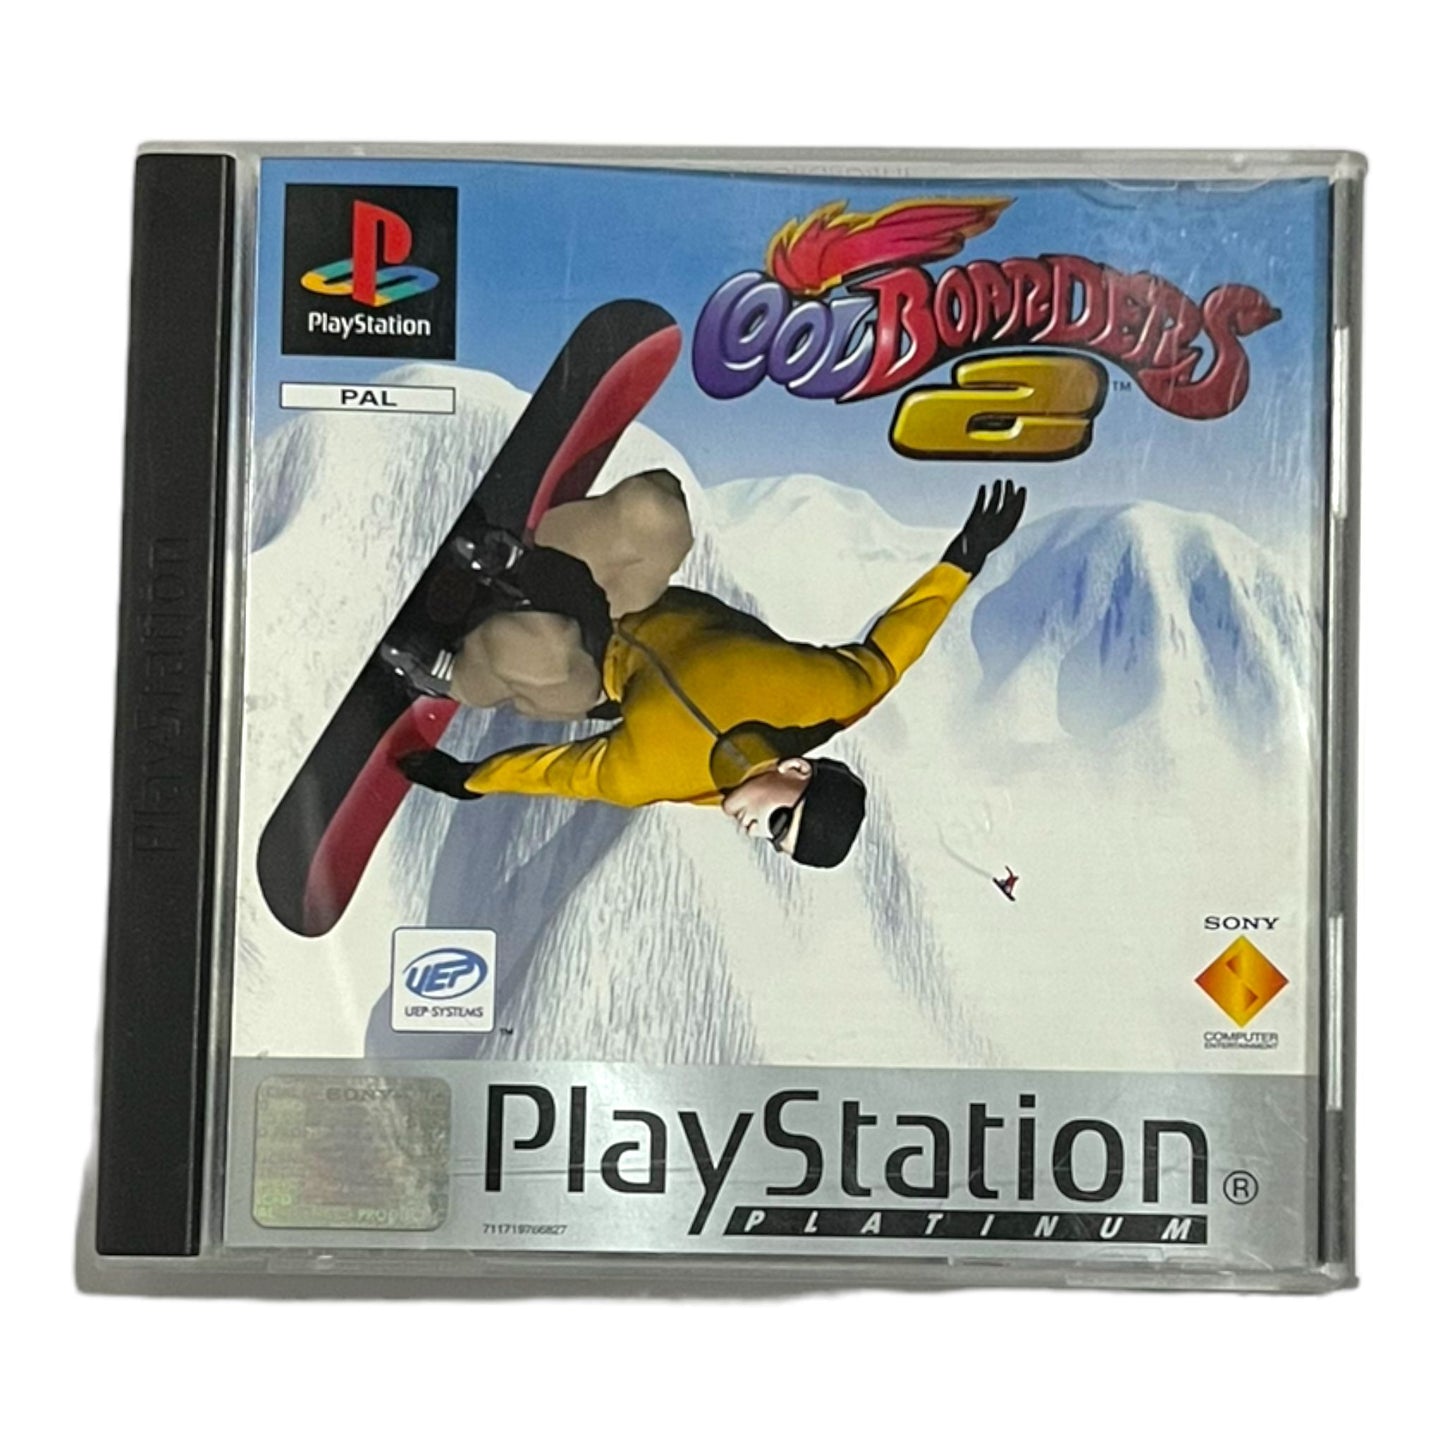 CoolBoarders 2 - Platinum